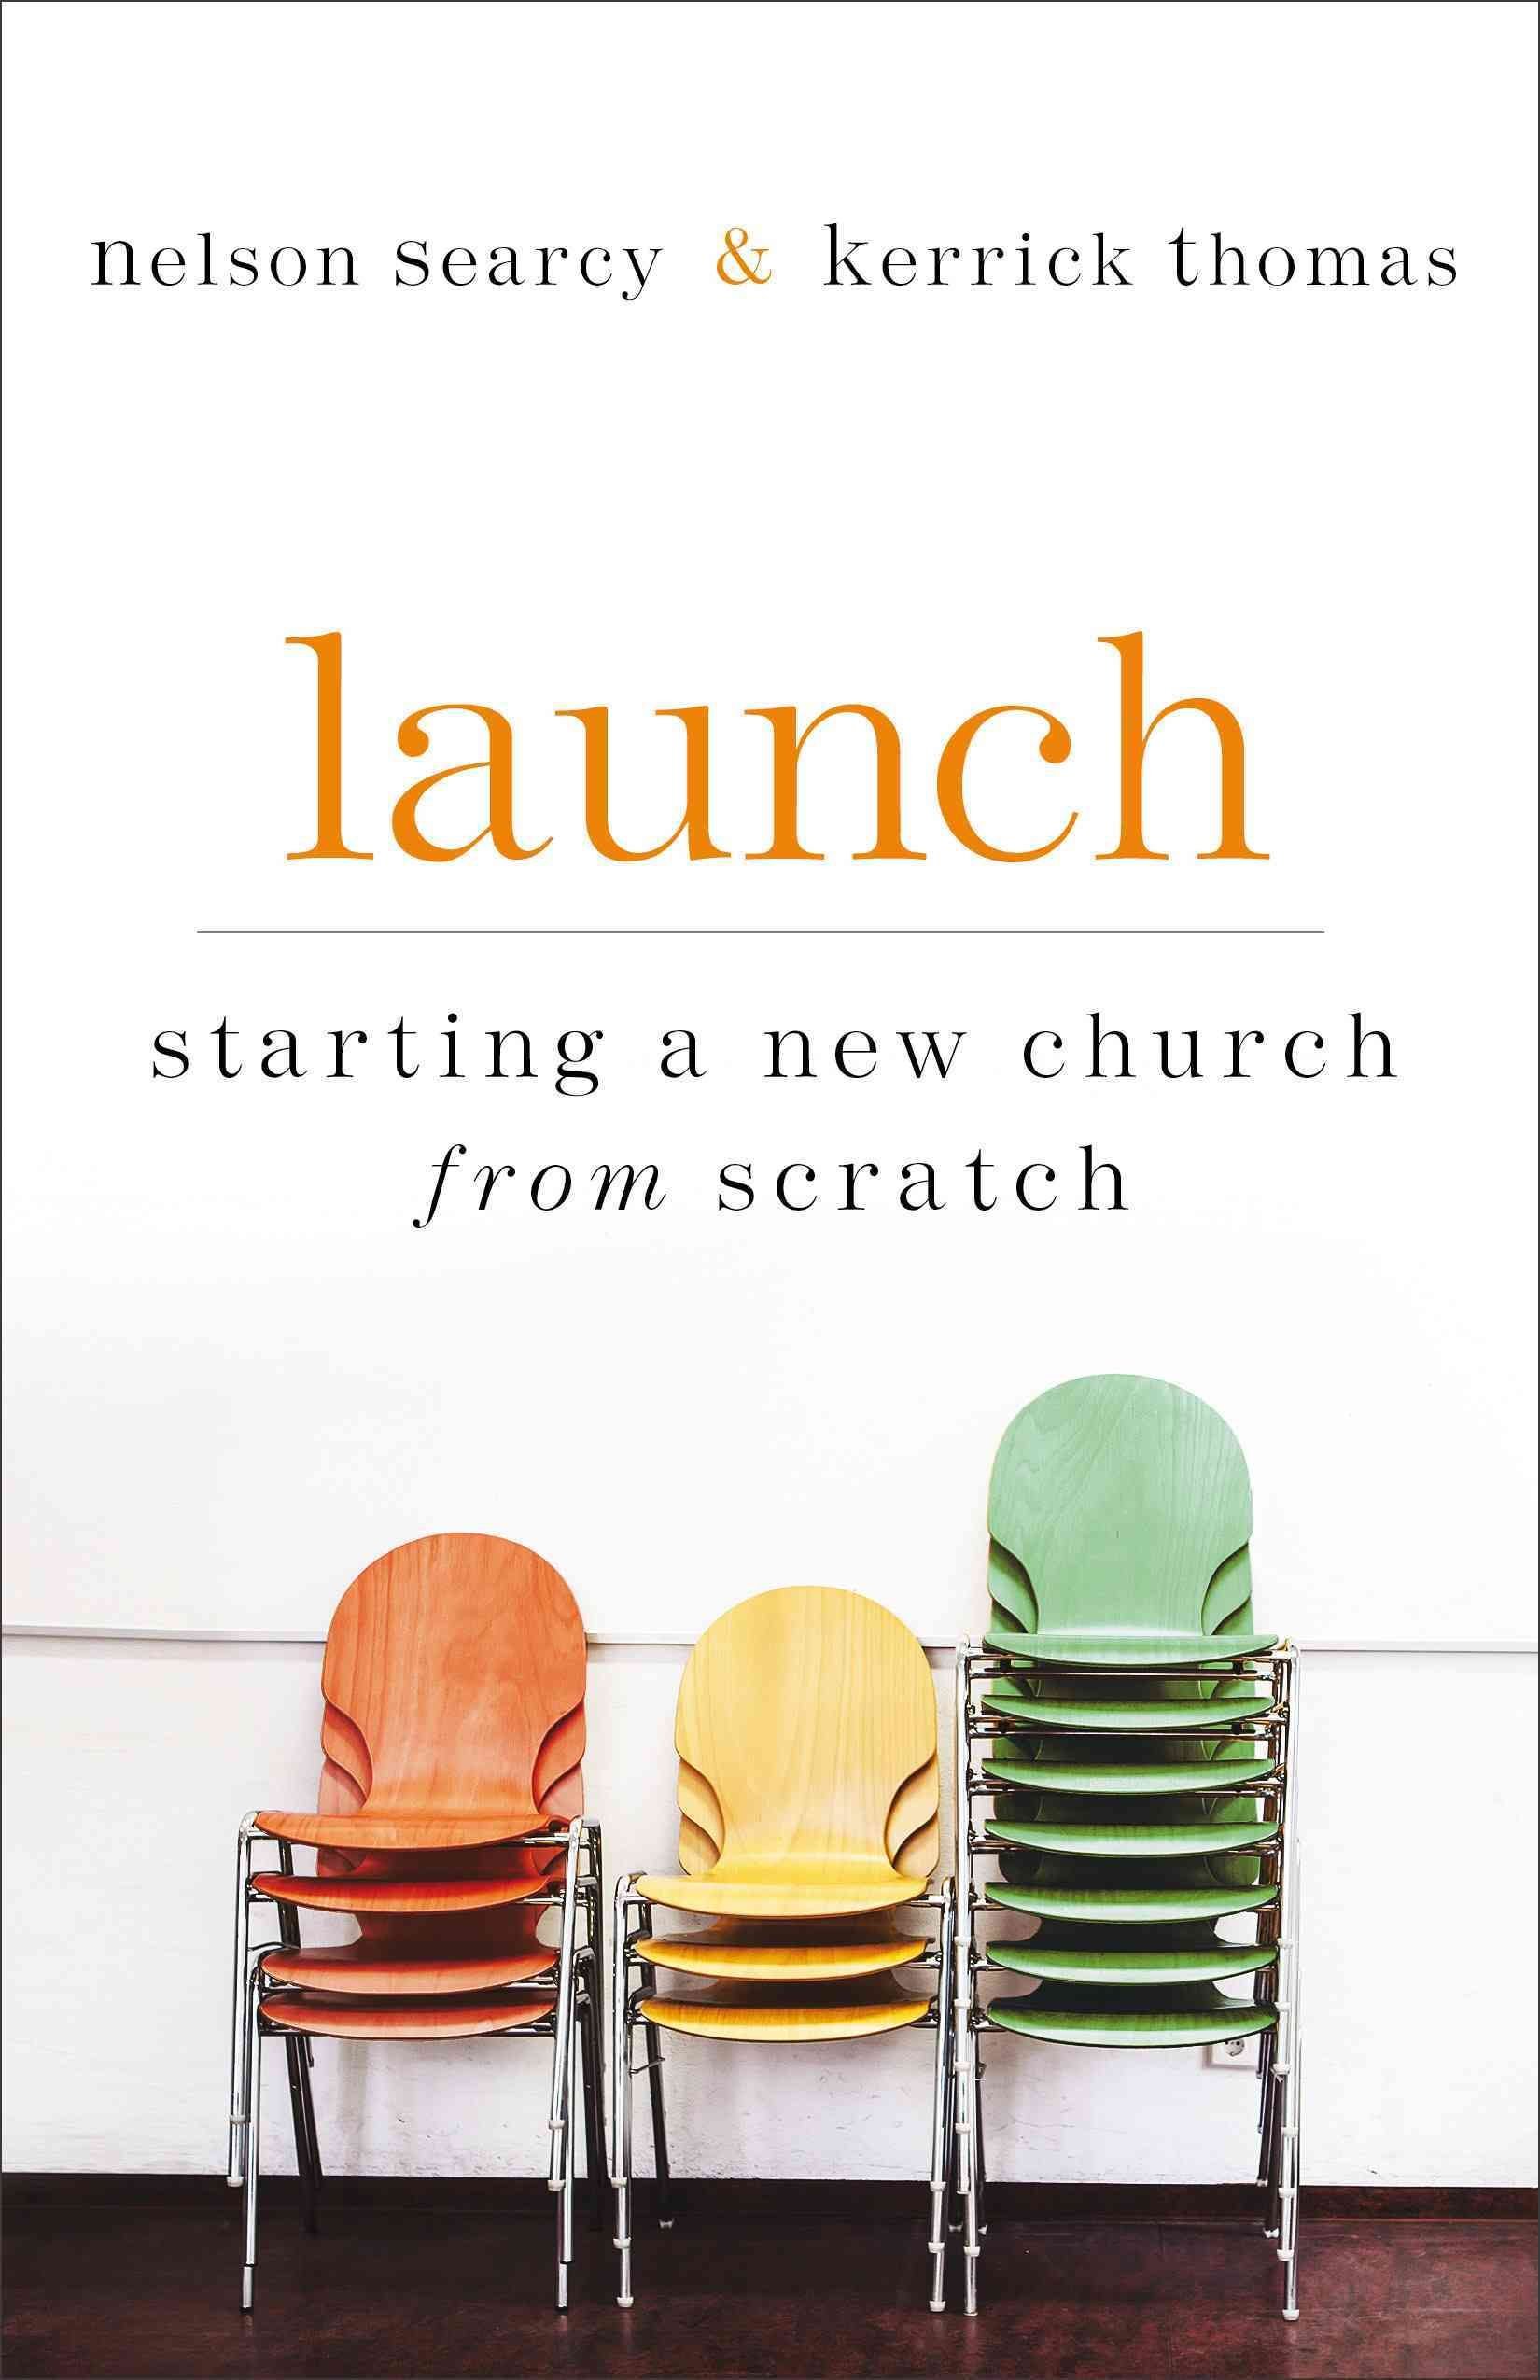 Launch - Starting a New Church from Scratch